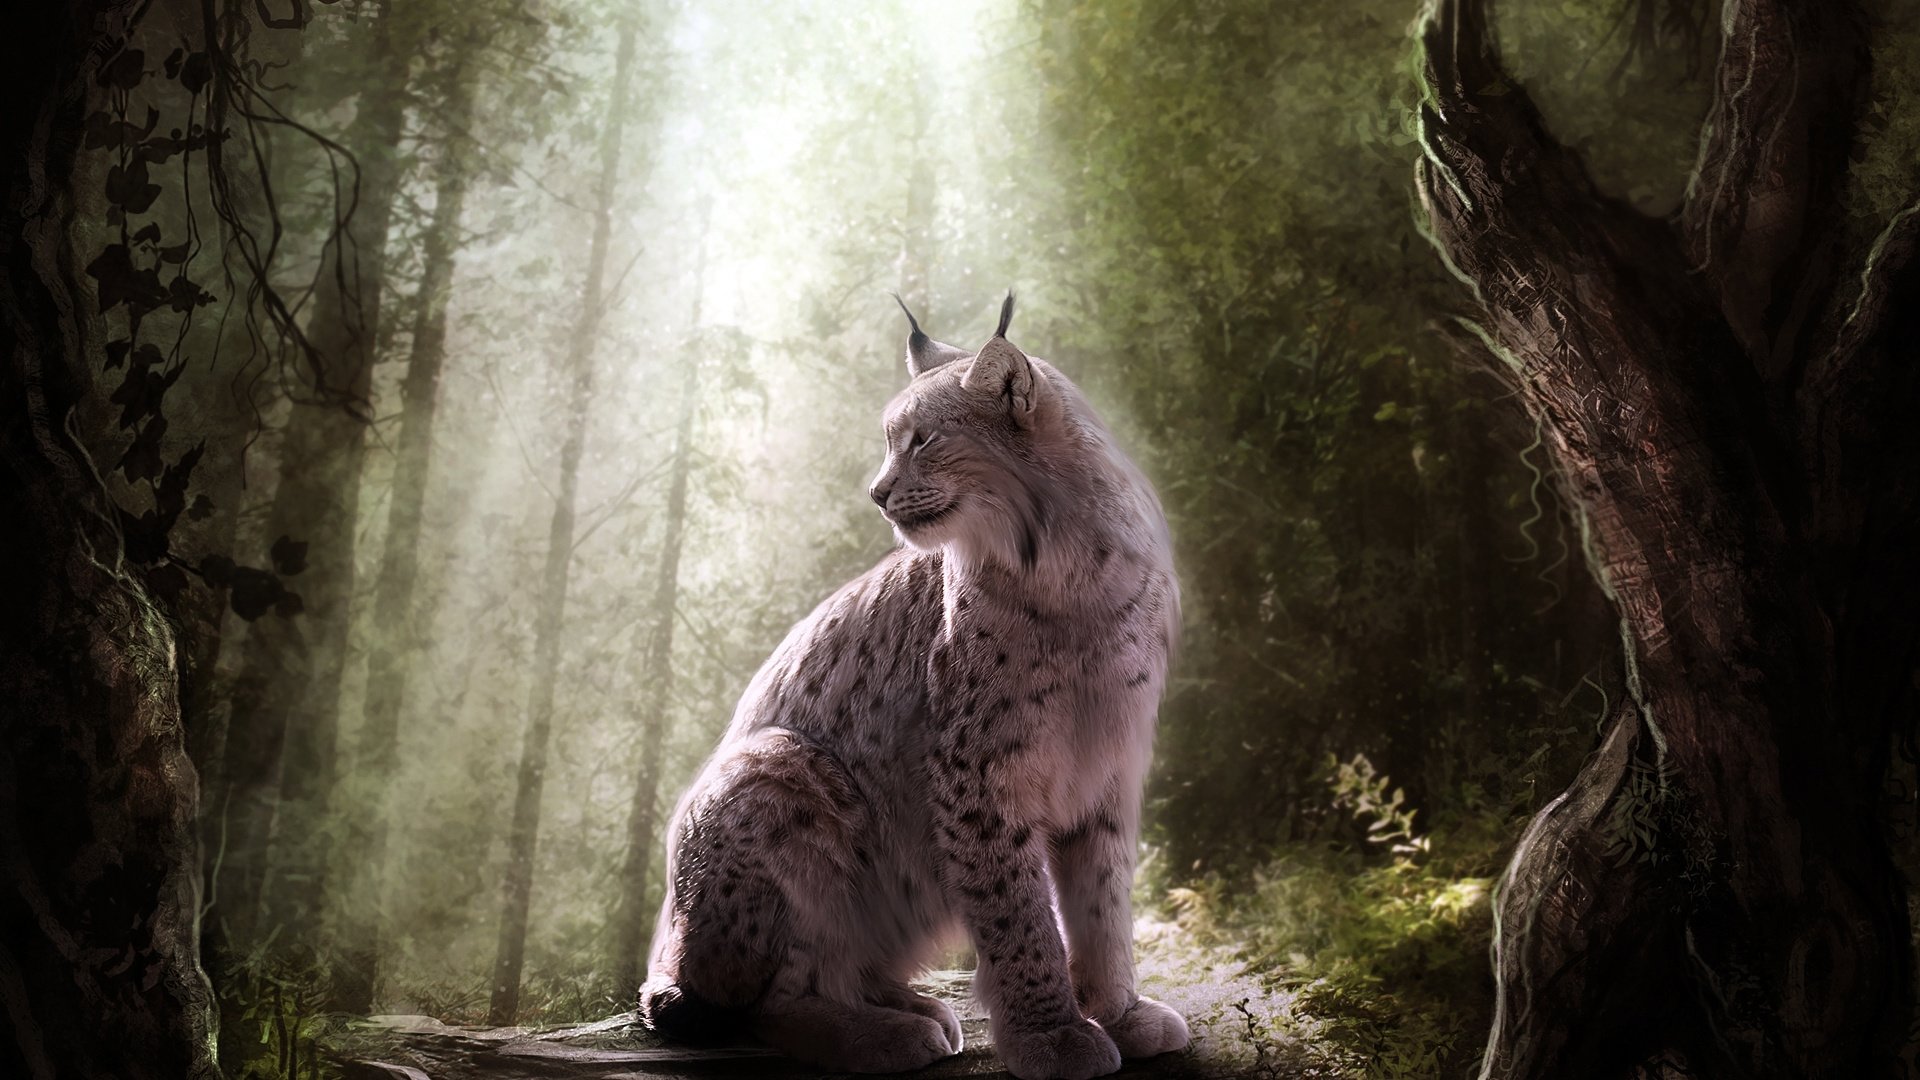 Download full hd 1920x1080 Lynx PC background ID:105815 for free